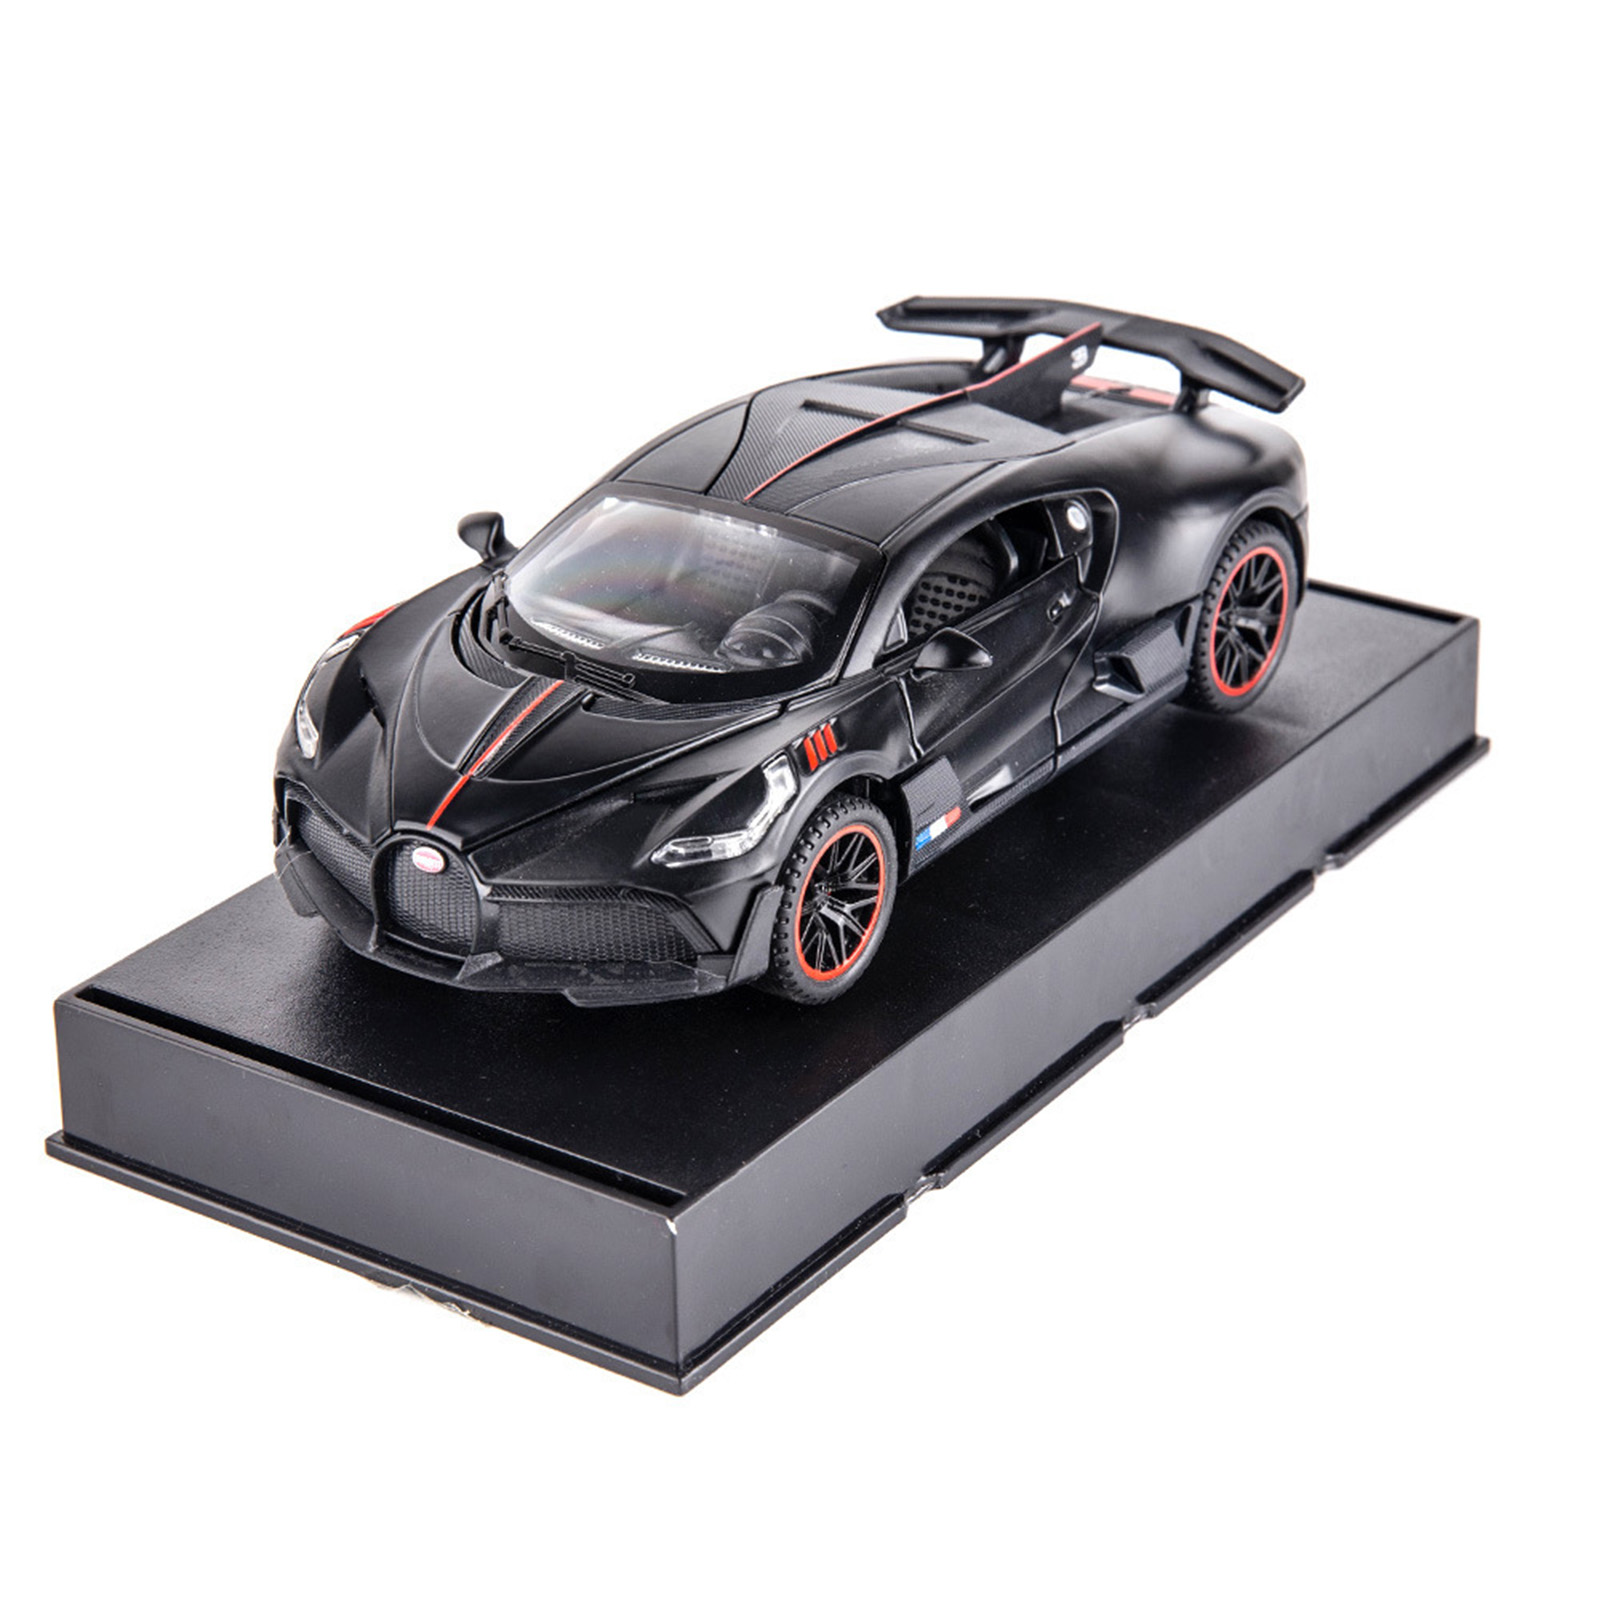 VB32603-1 Alloy Sports Car Model Ornaments Simulation Diecast Car With Sound Light For Kids Birthday Christmas Gifts